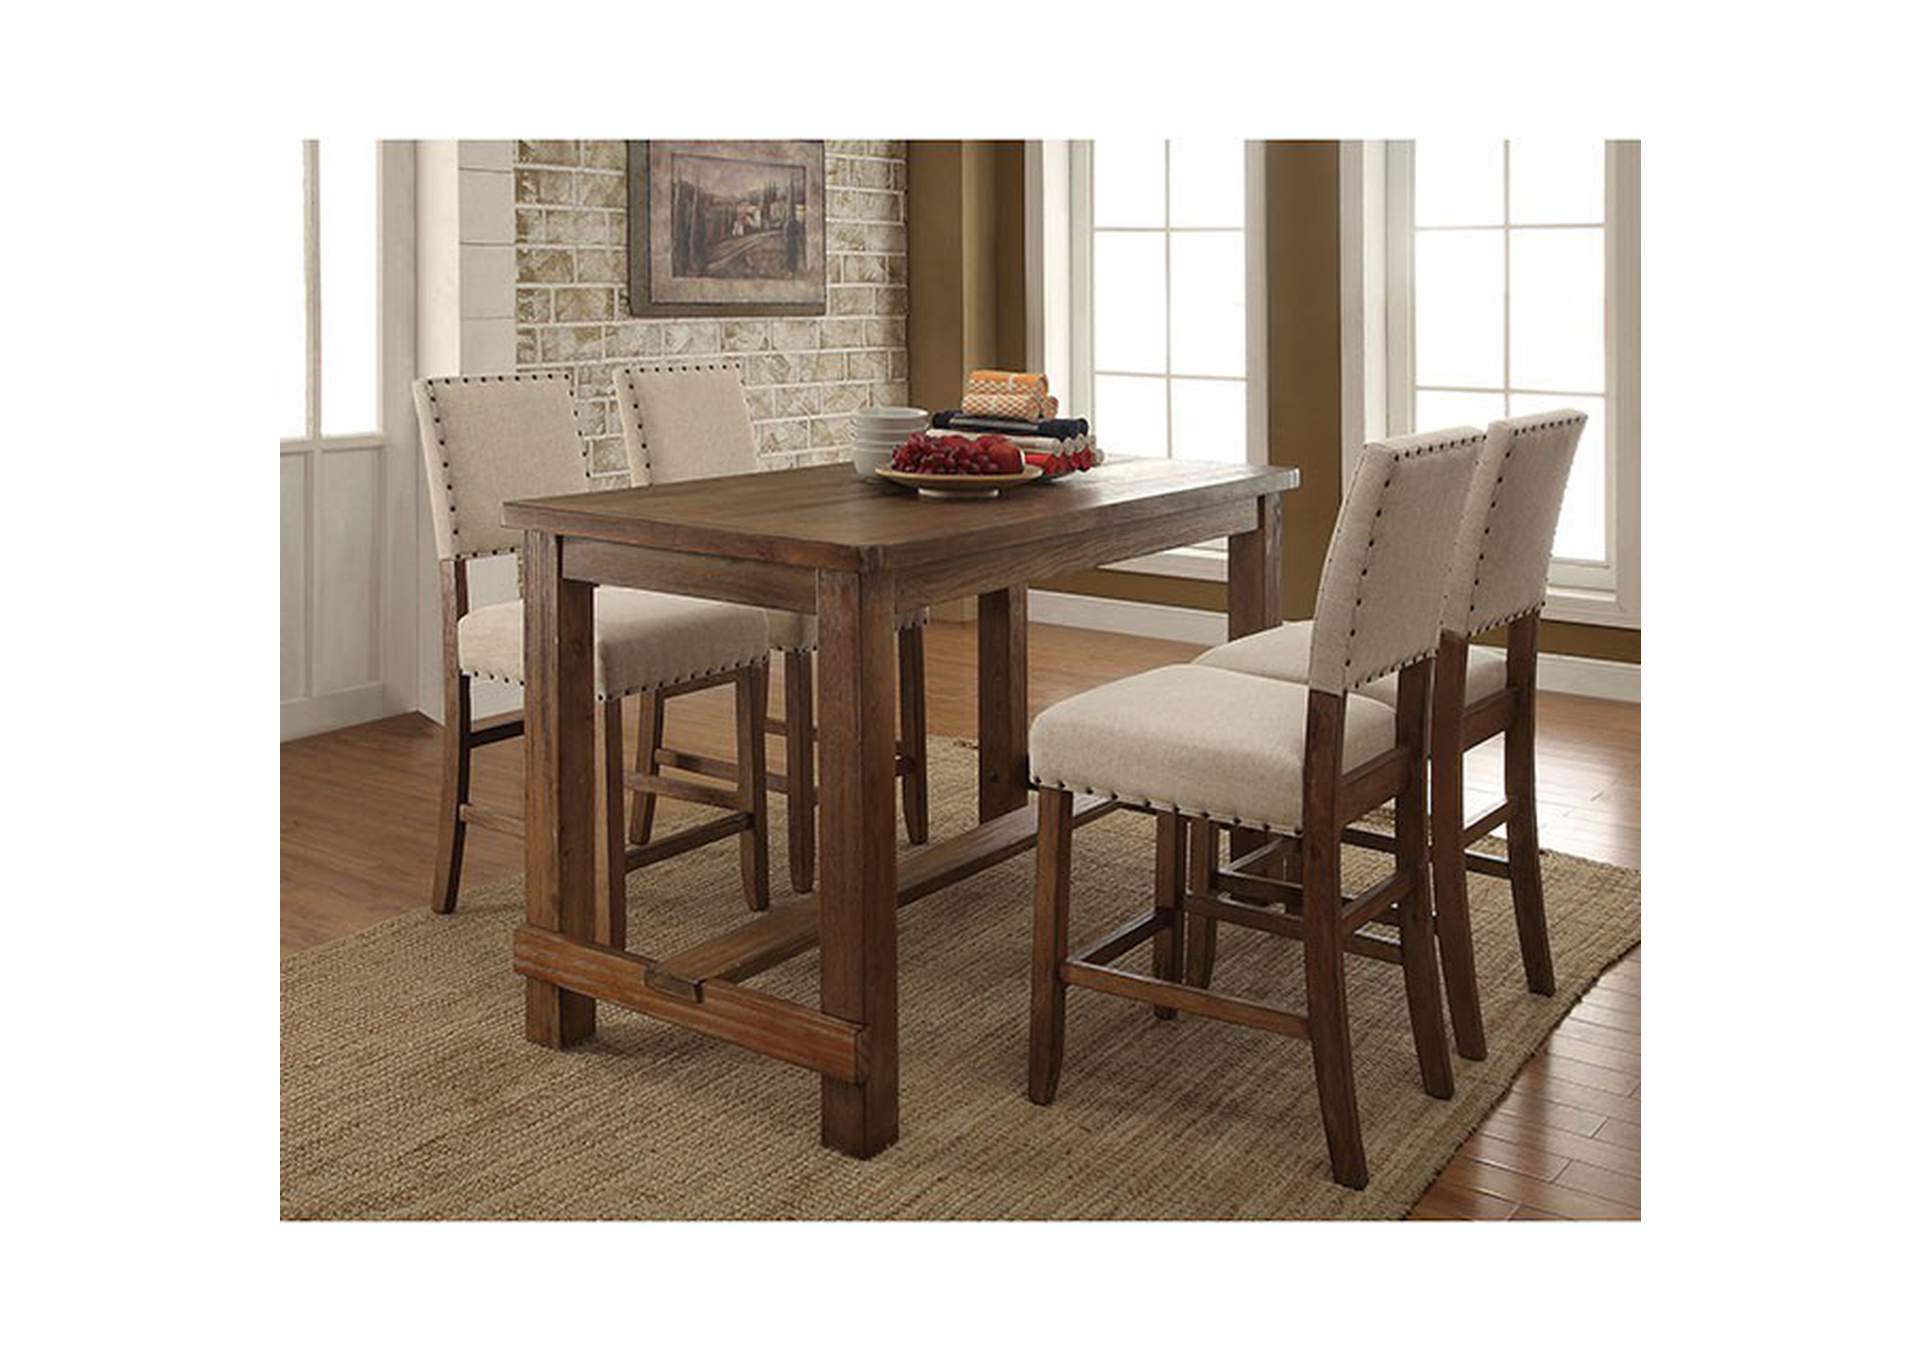 Sania Counter Ht. Chair (2 - Box),Furniture of America